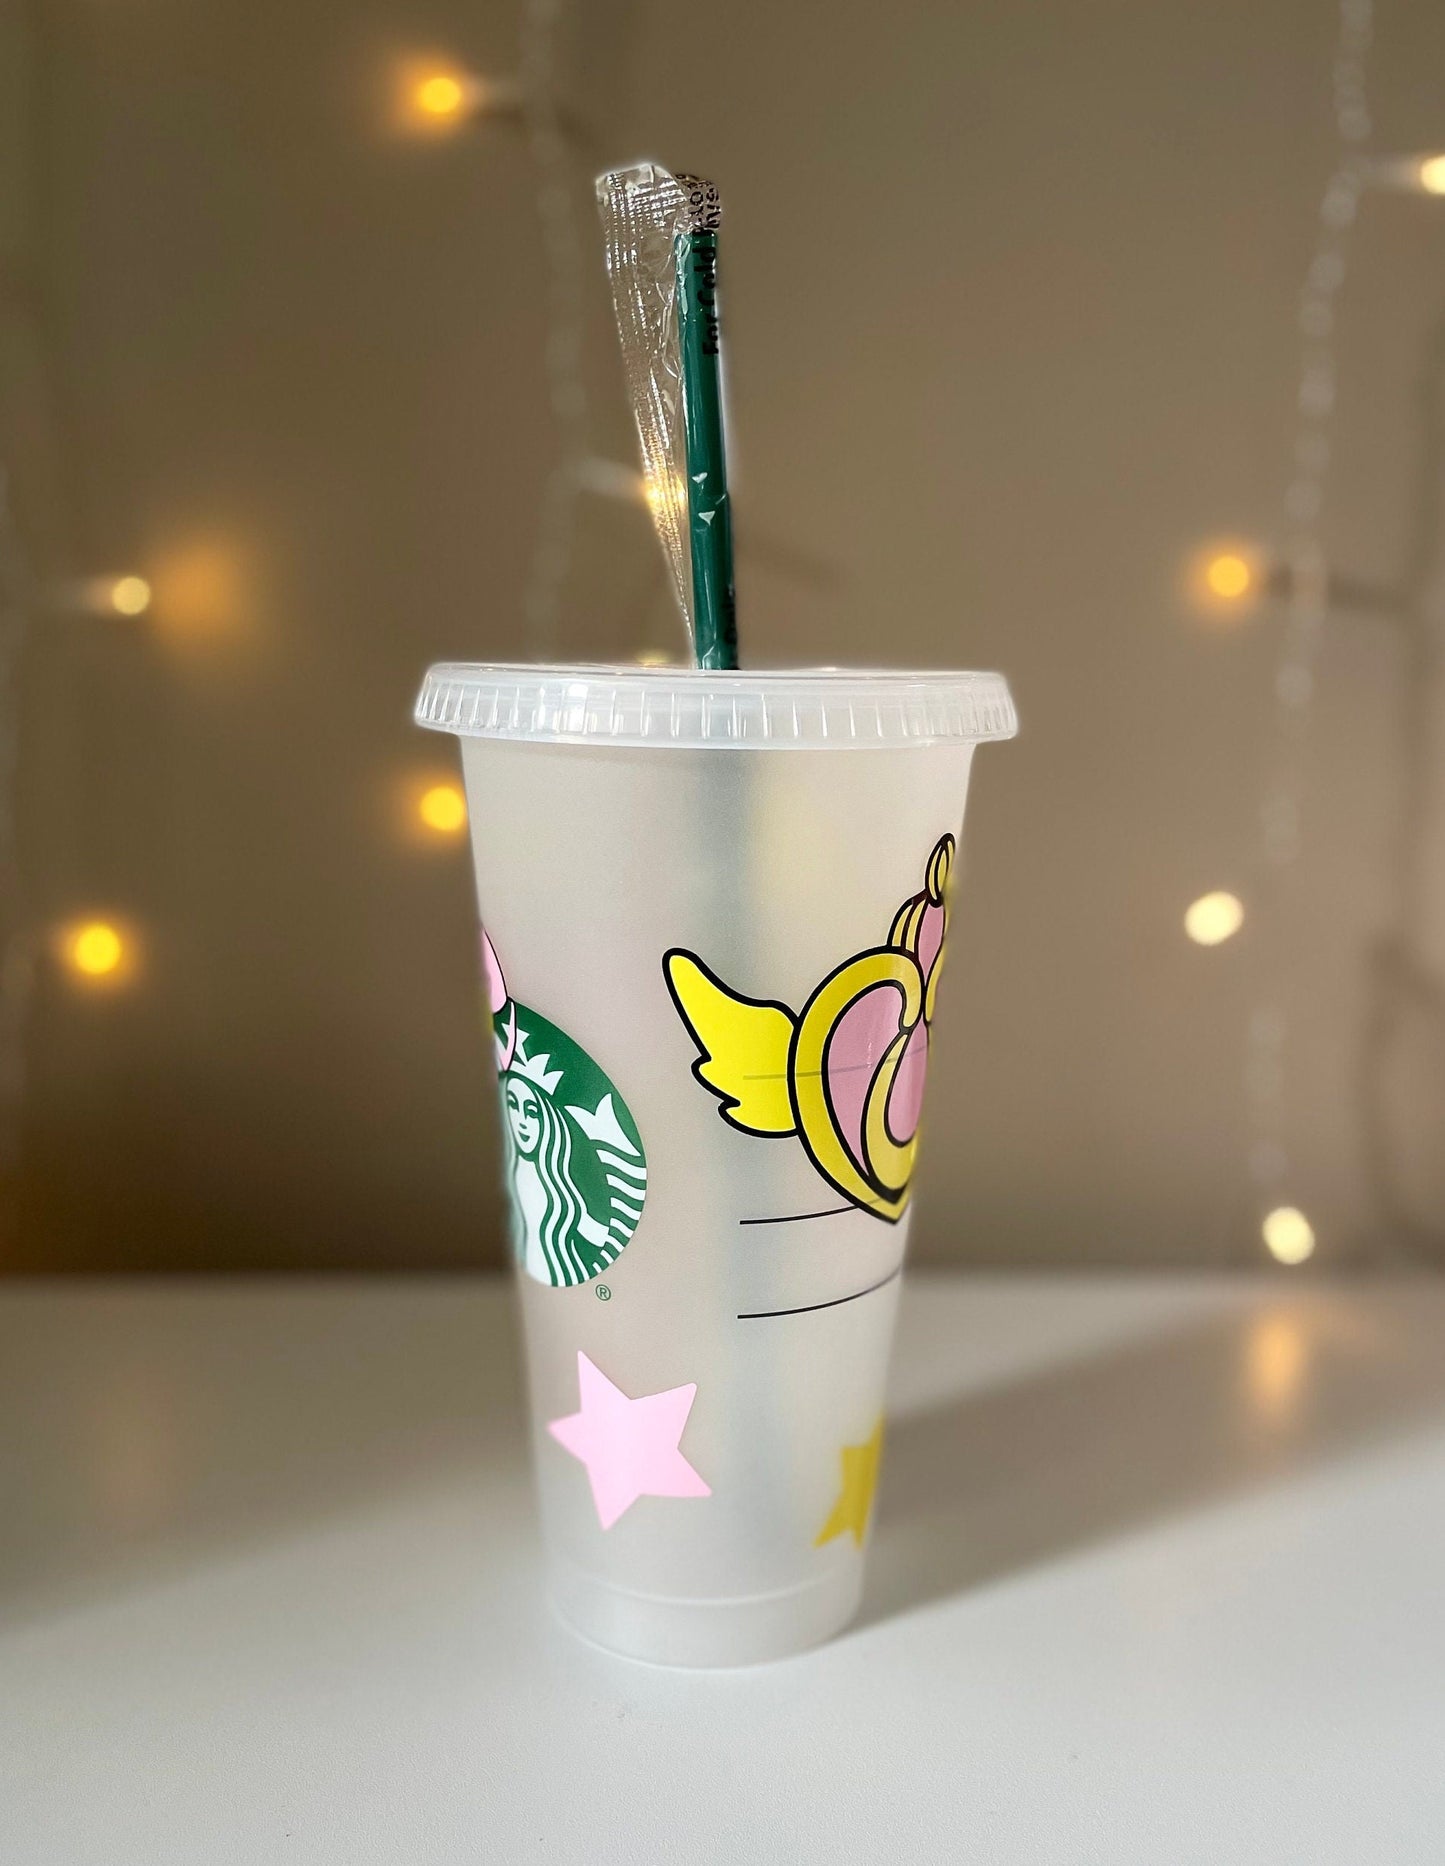 Plastic Reusable Cold Cup with Lid & Straw - 24 fl oz: Starbucks